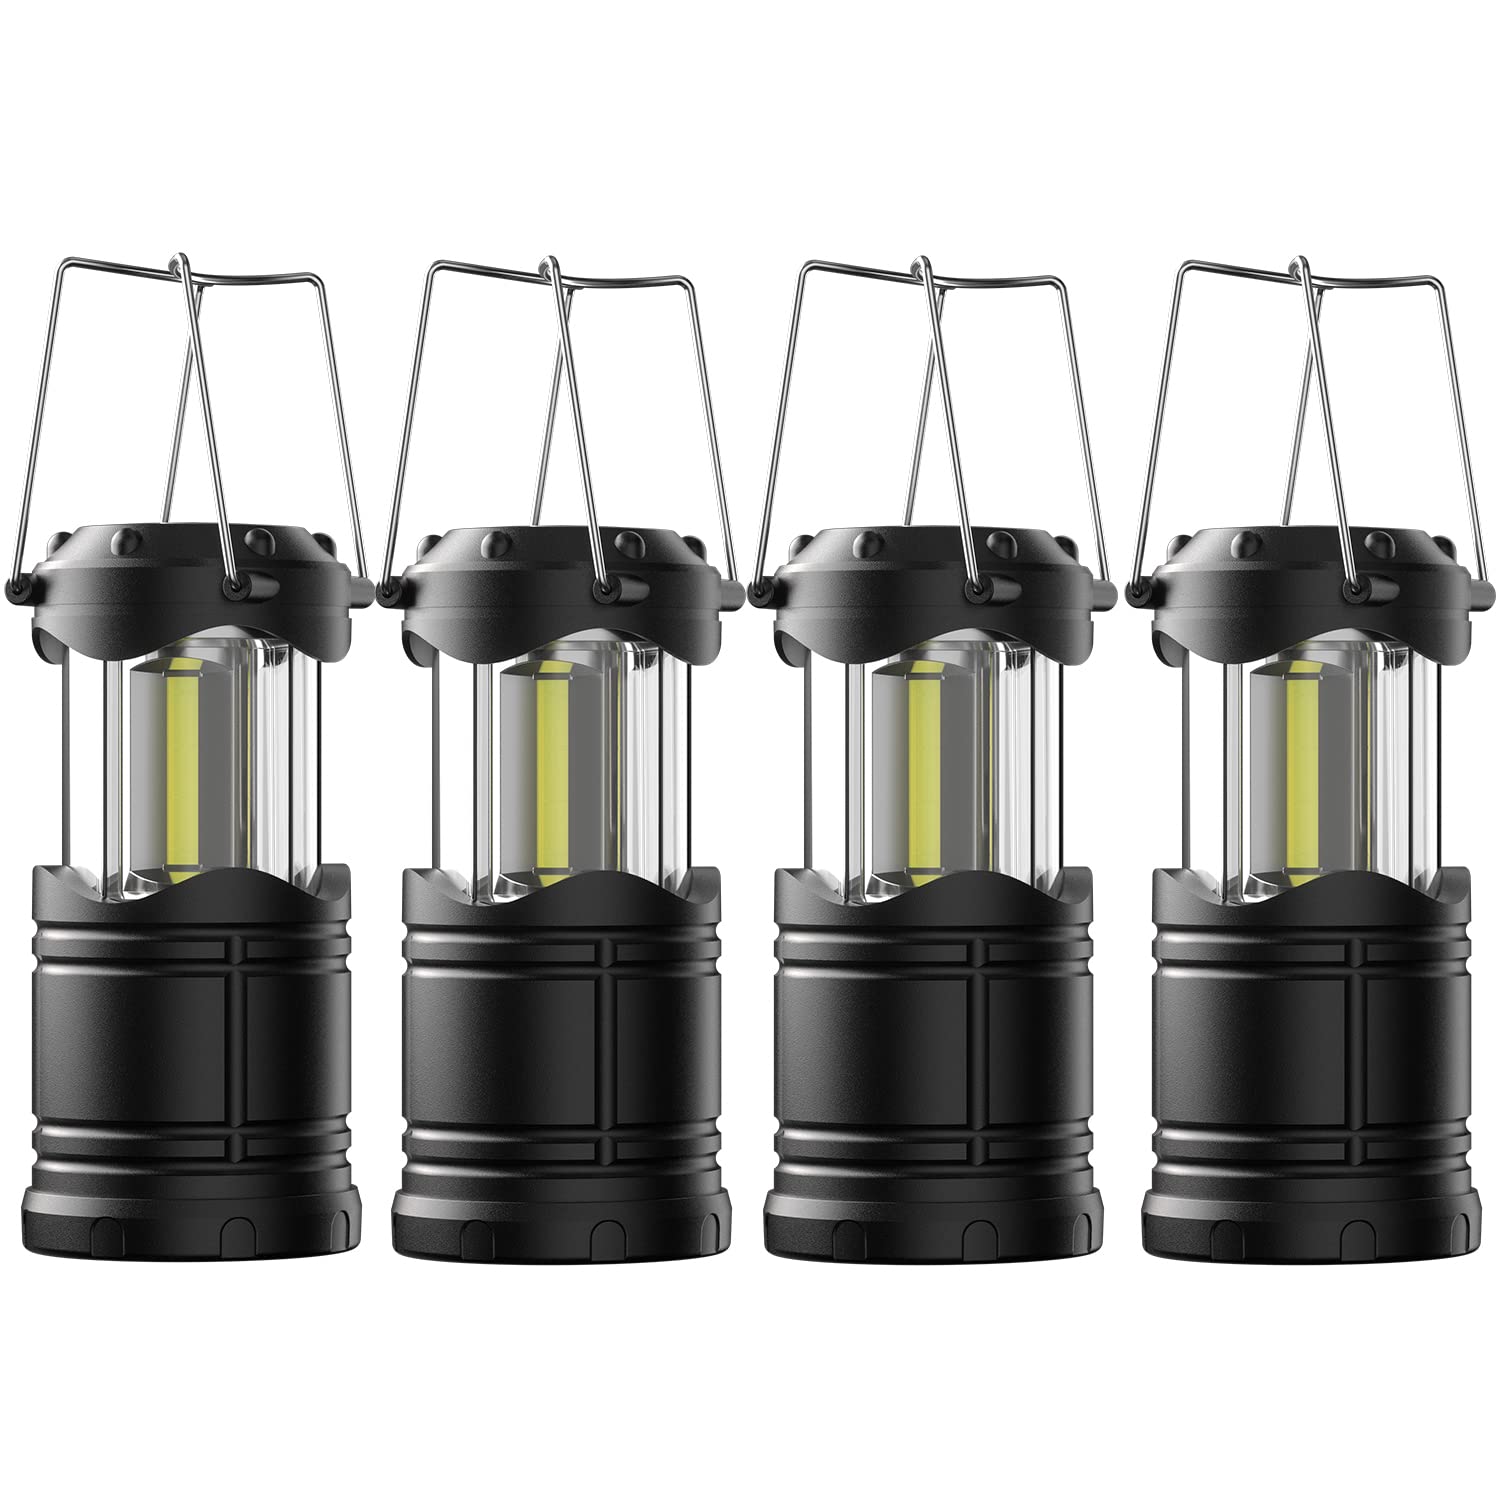 4 Pack Lichamp LED Camping Lanterns, Battery Powered Super Bright $11.49 Free Ship w/Prime or on orders $35